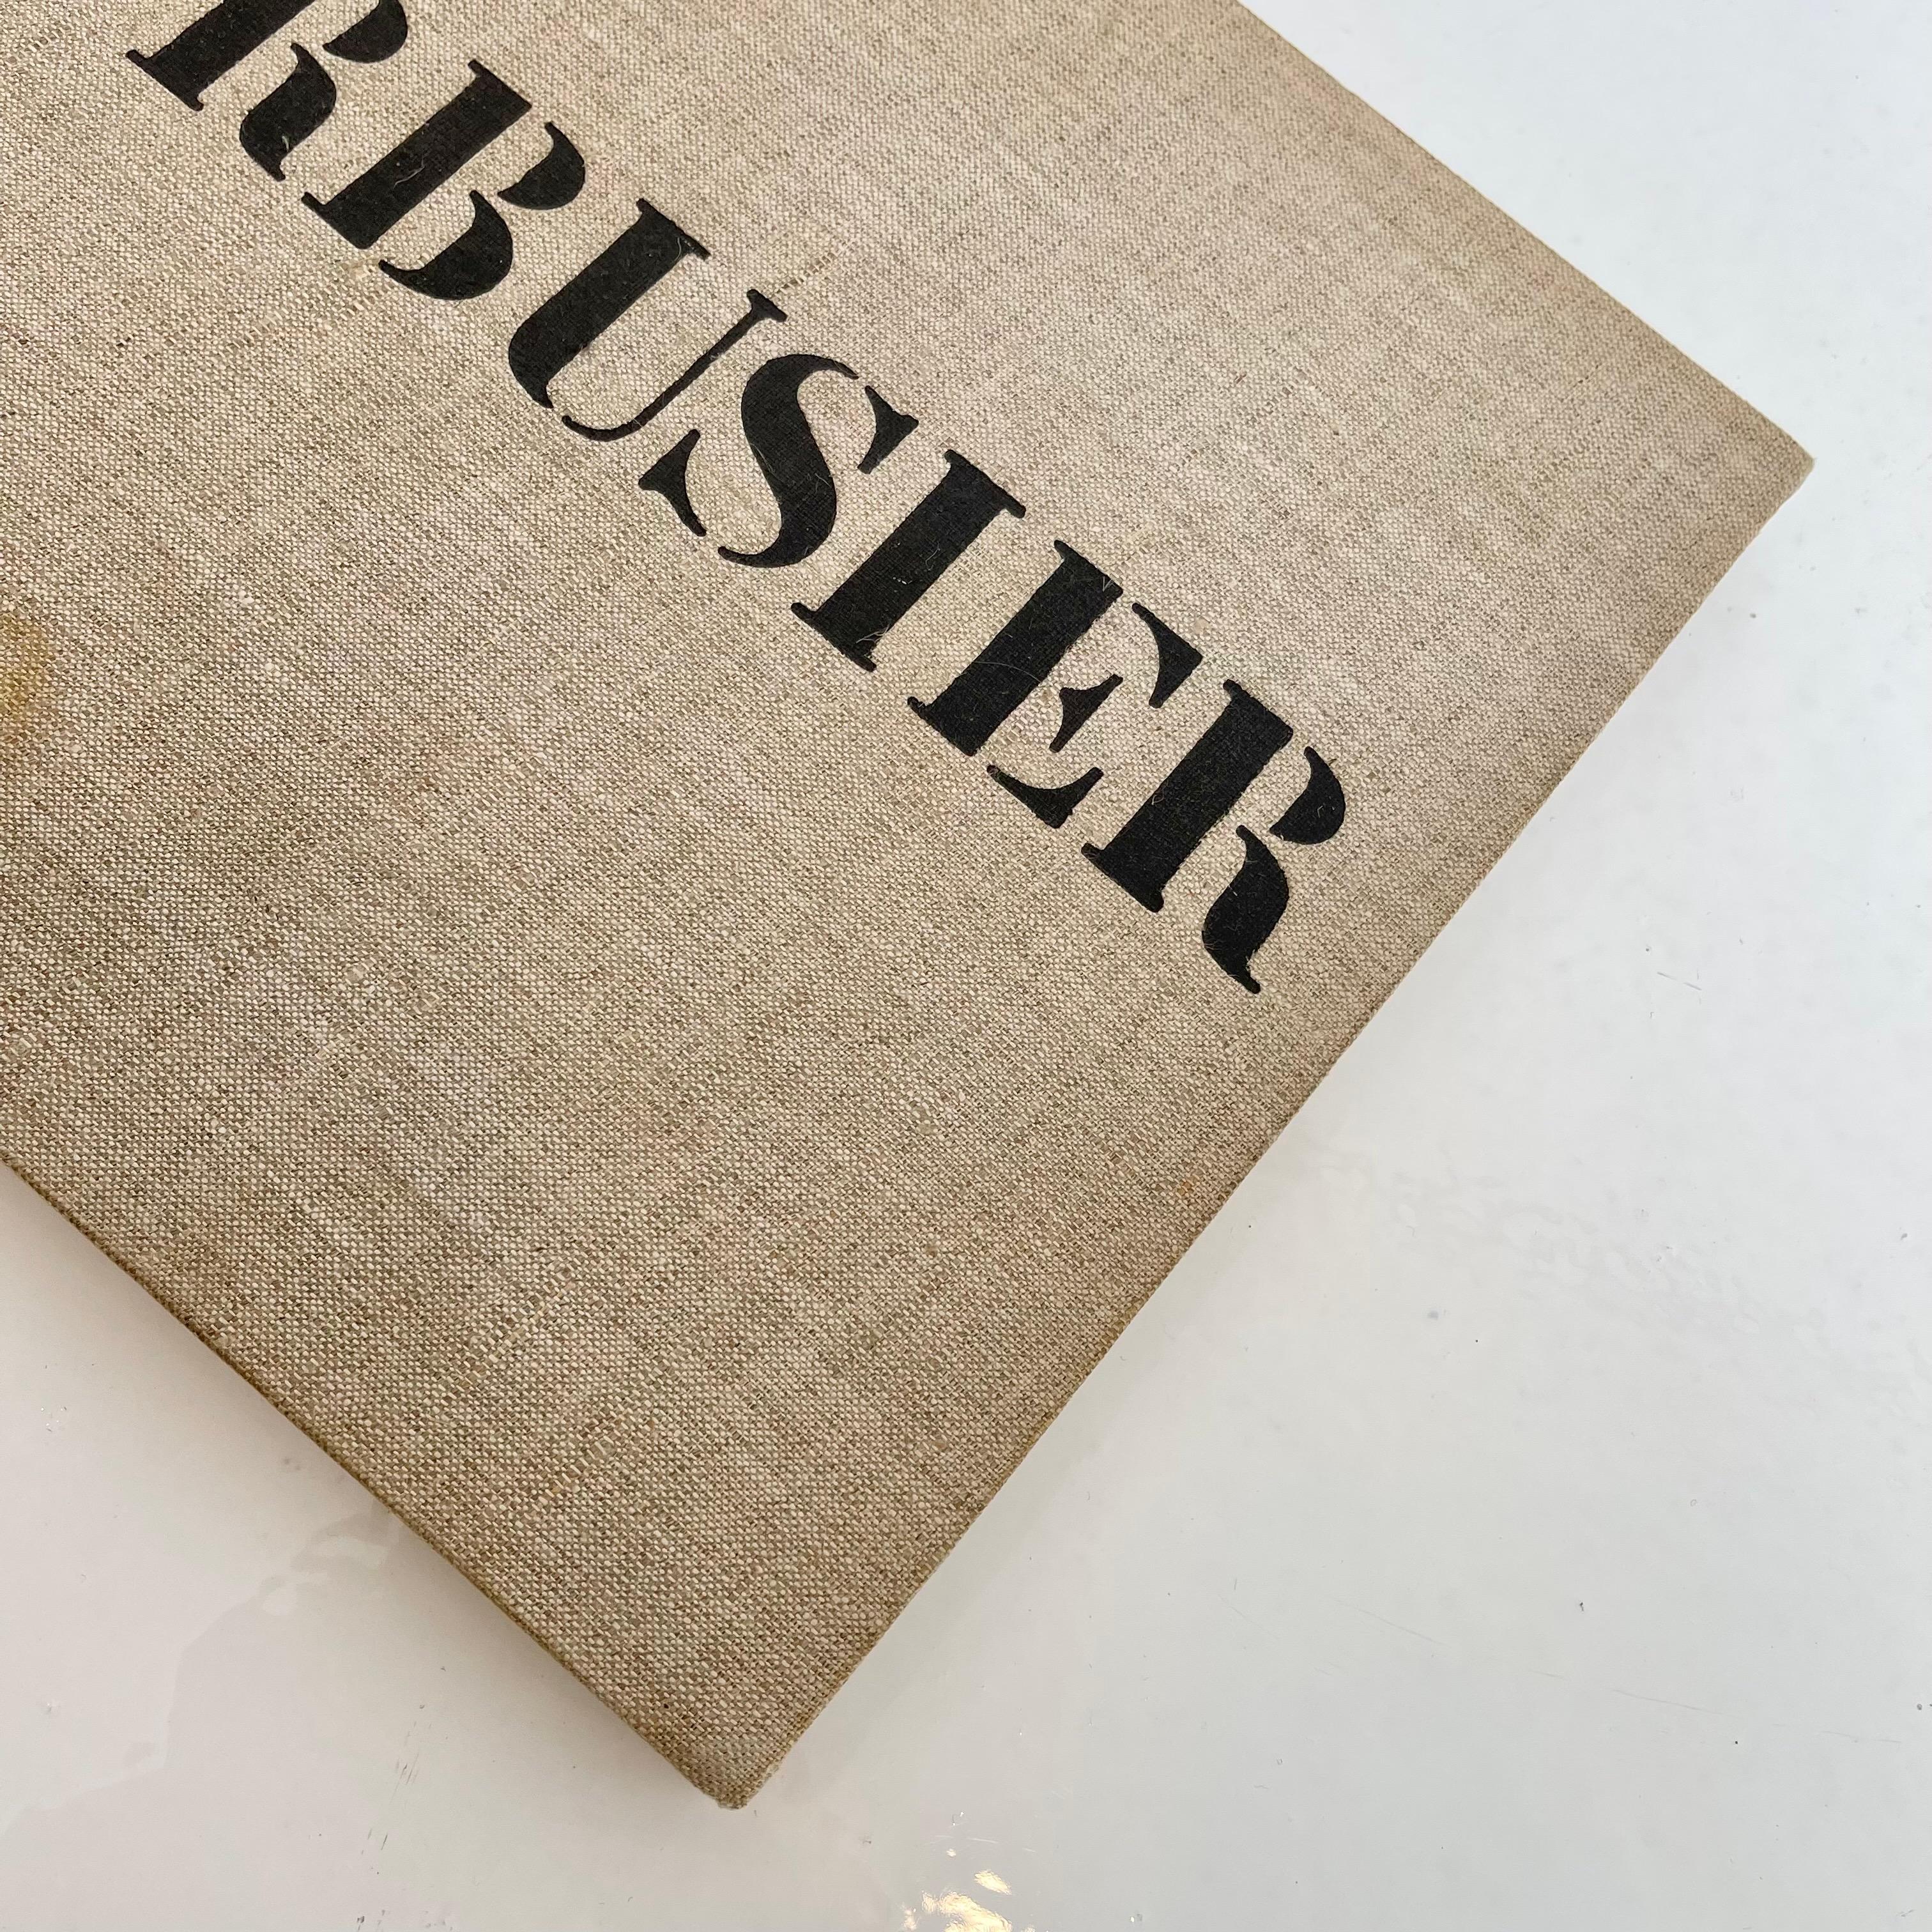 Swiss Corbusier, First Edition Book 1937